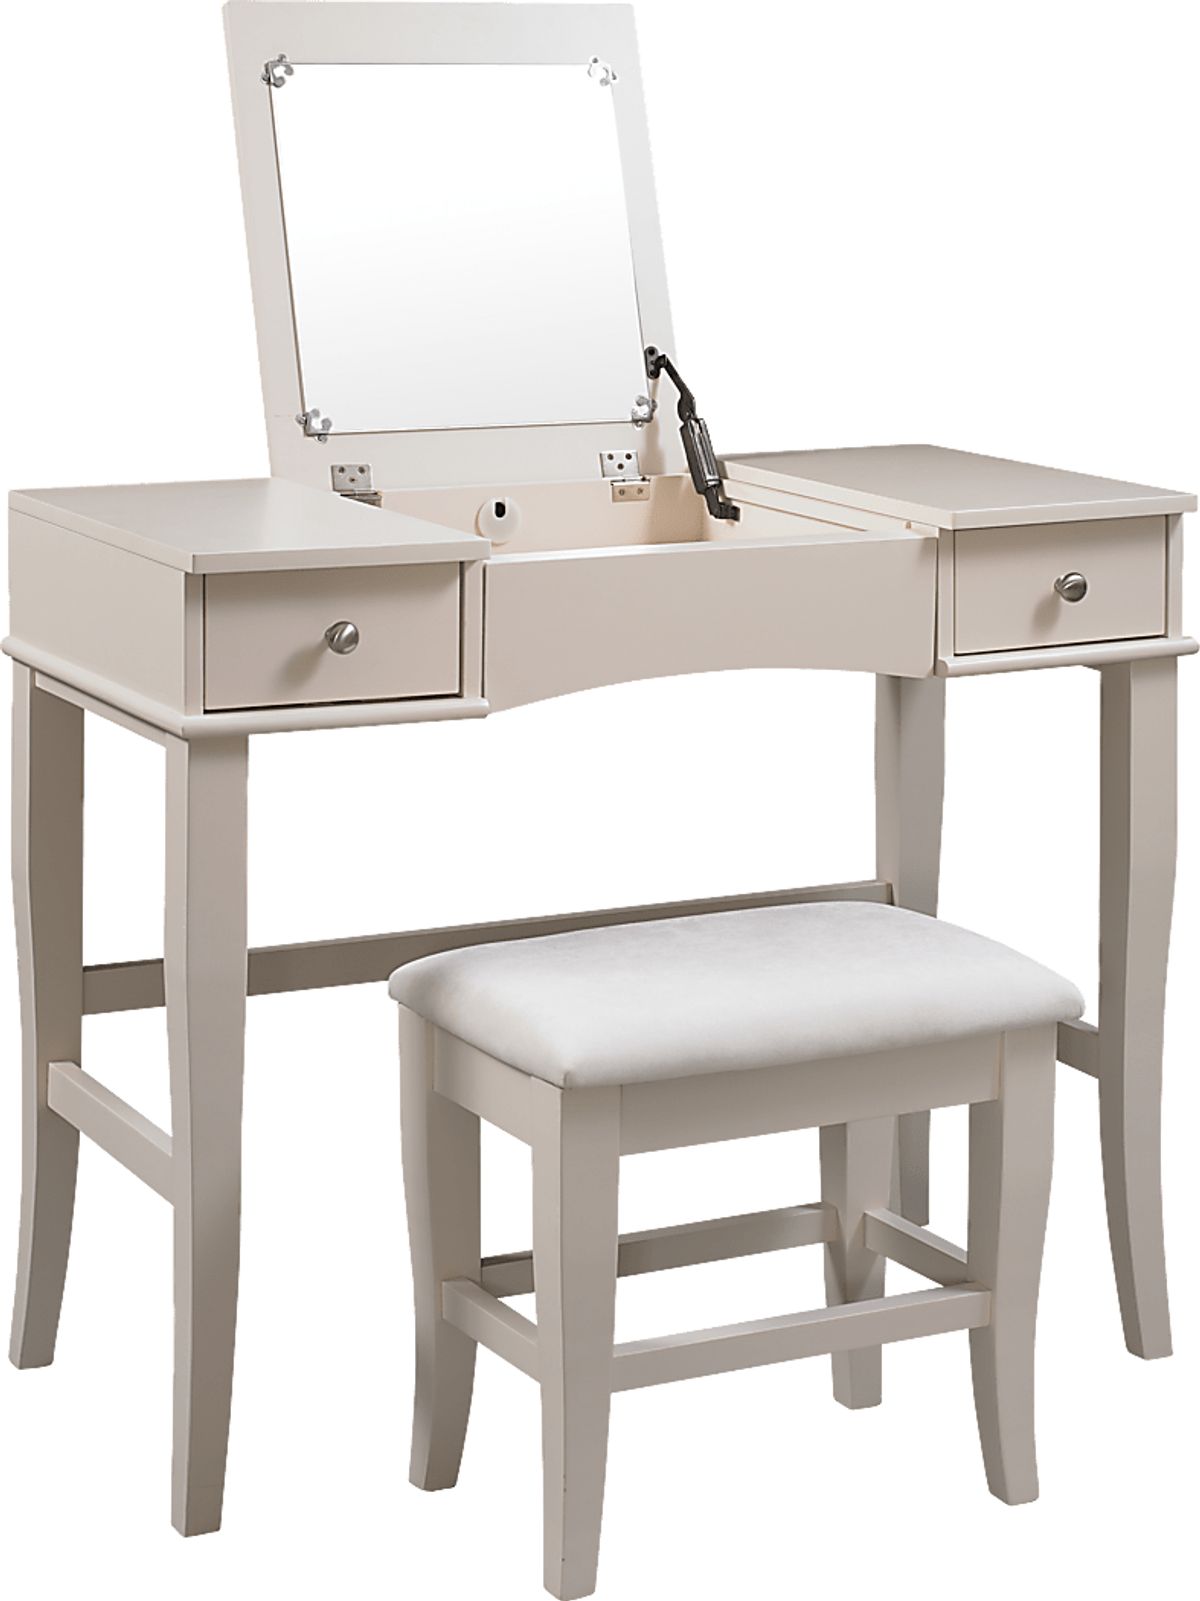 Connie Mae Cream Colors,Light Wood,White Vanity Set | Rooms to Go